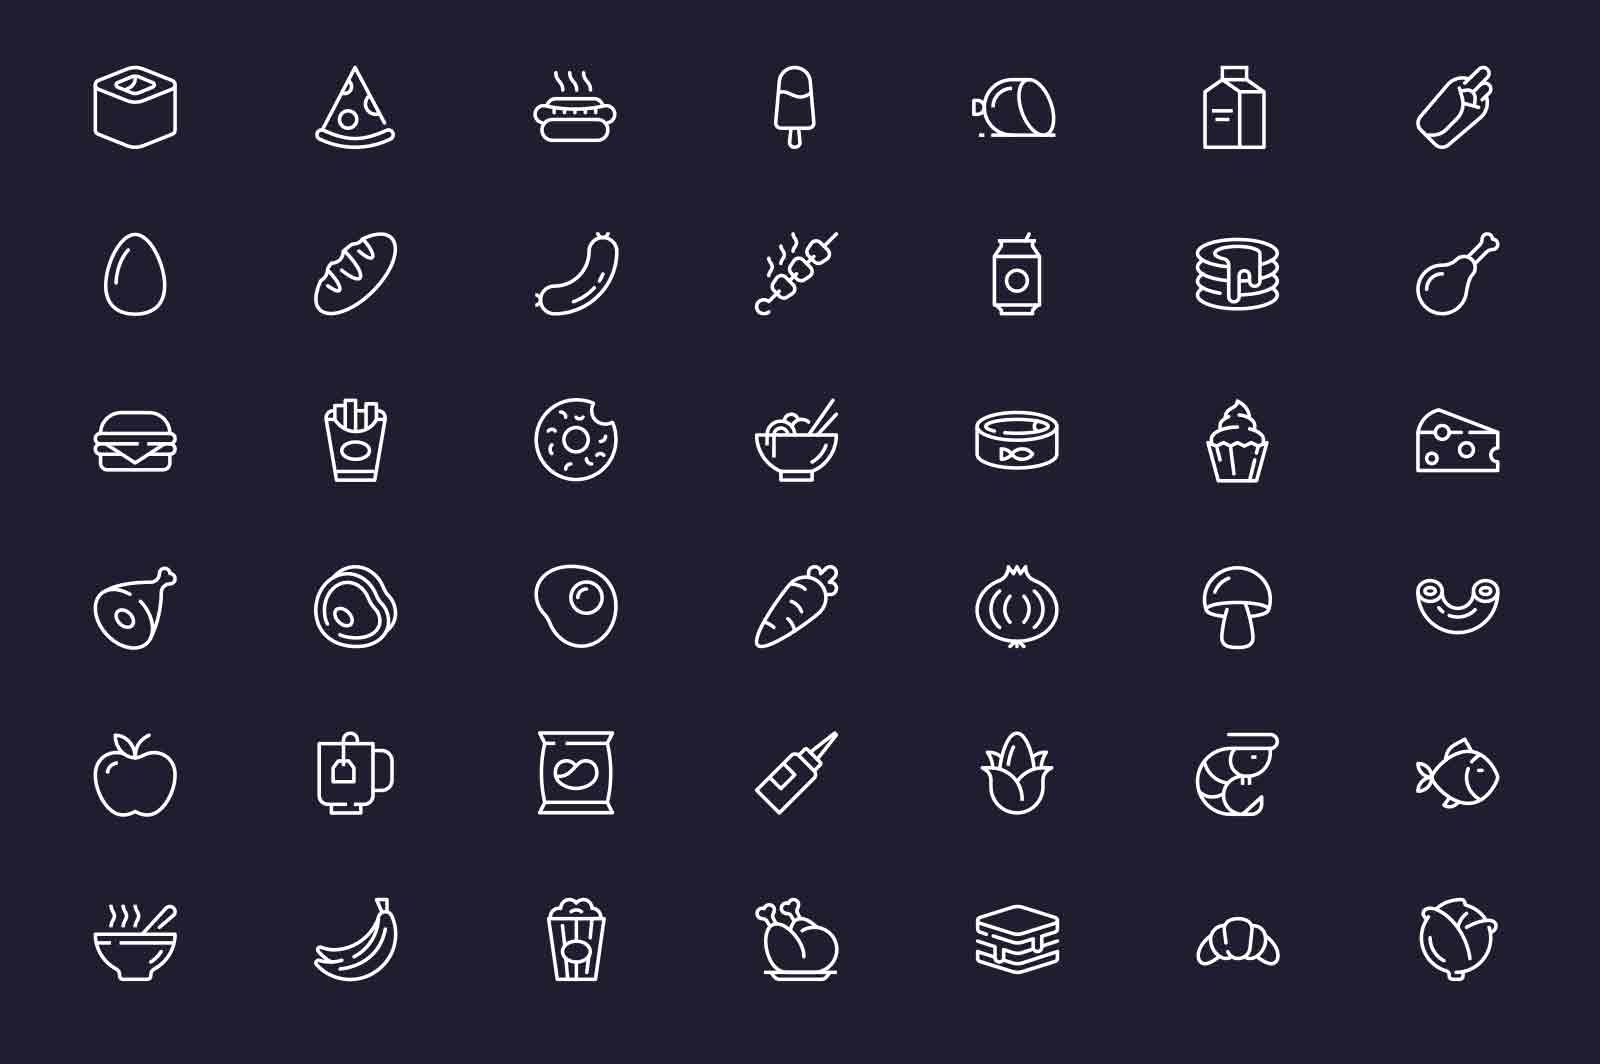 Food and drink related icons set vector illustration. Homemade, fast food and take away line icon. Dark background